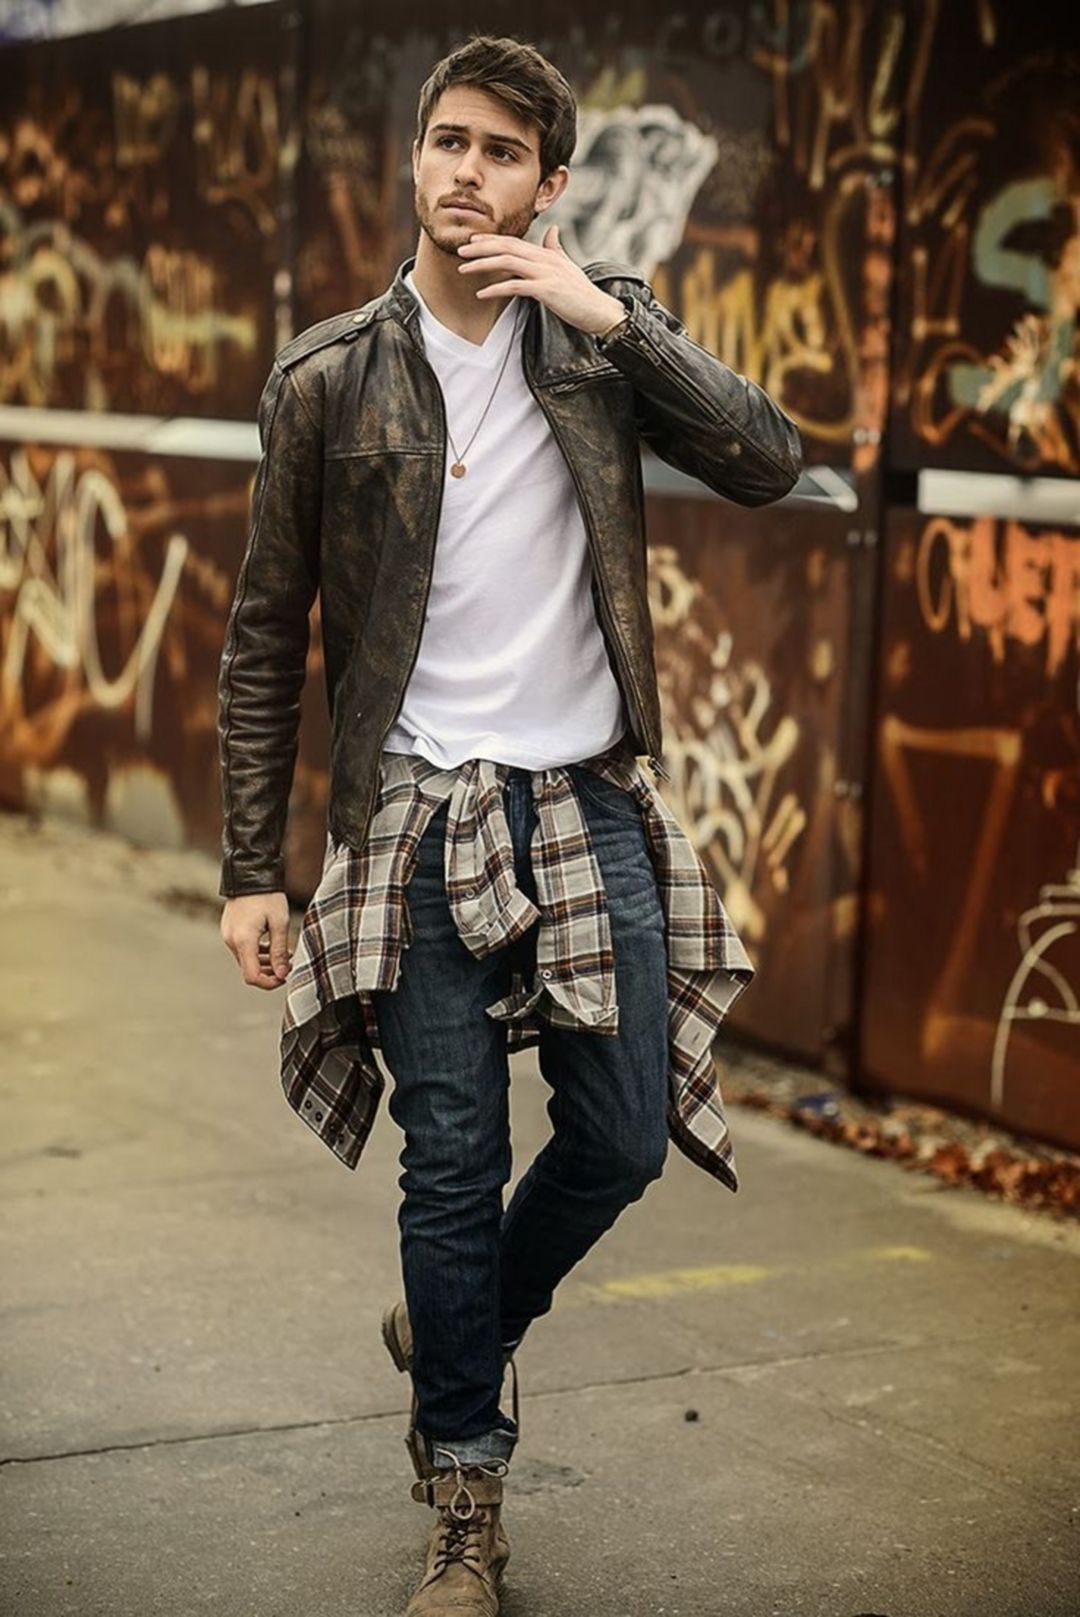 10 Fashionable Men's Casual Styles You Can Try - 10 Fashionable Men's Casual Styles You Can Try -   10 style Mens grunge ideas